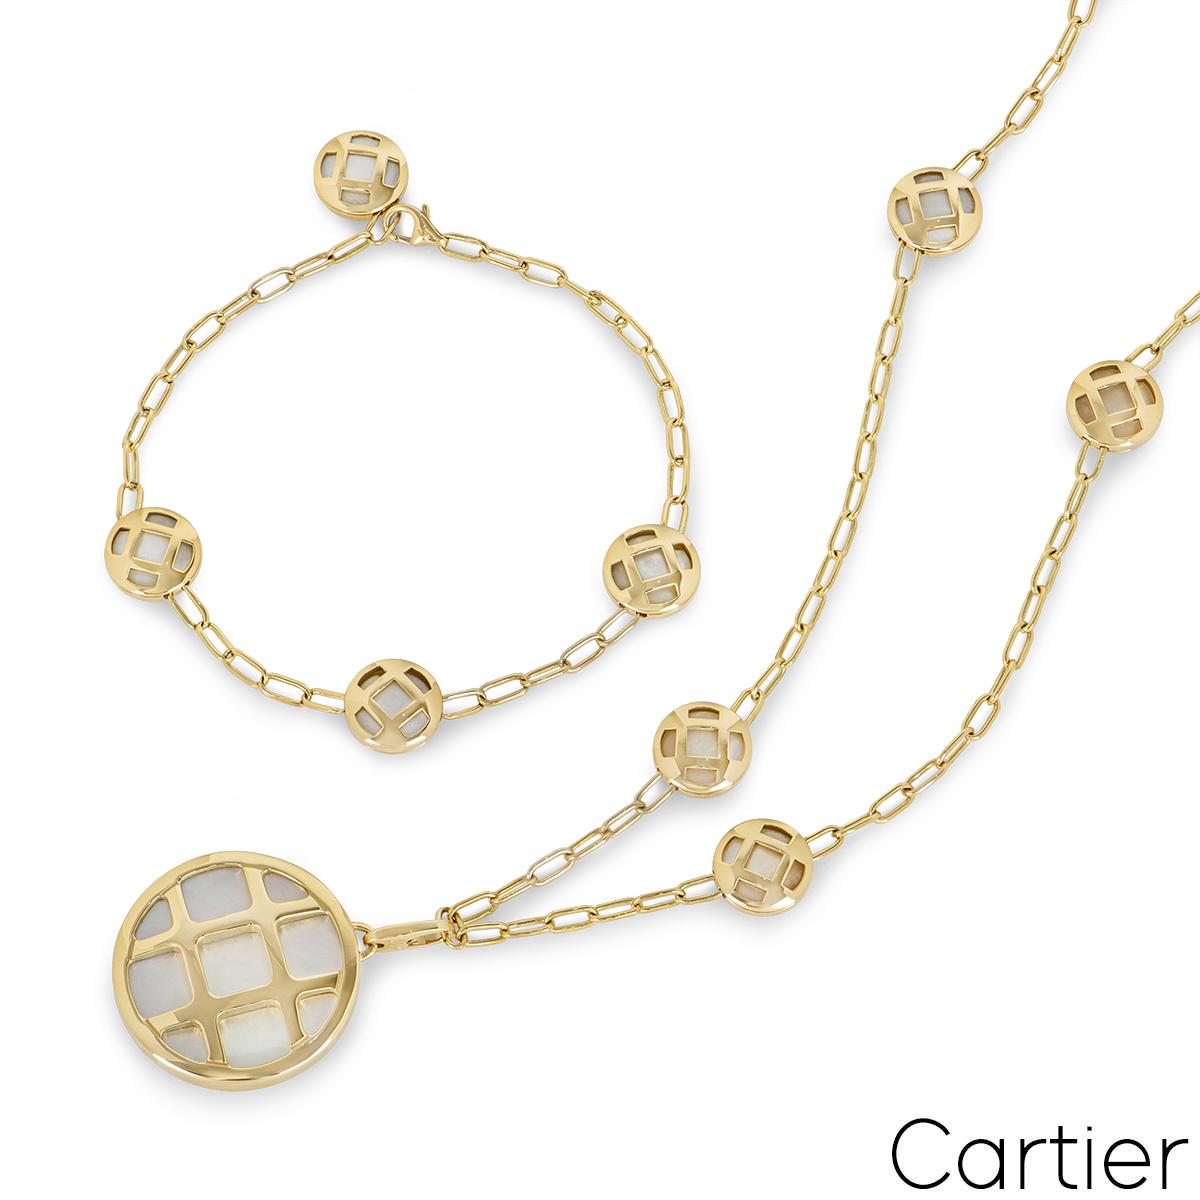 Women's Cartier Yellow Gold Mother of Pearl Pasha Necklace and Bracelet Set For Sale